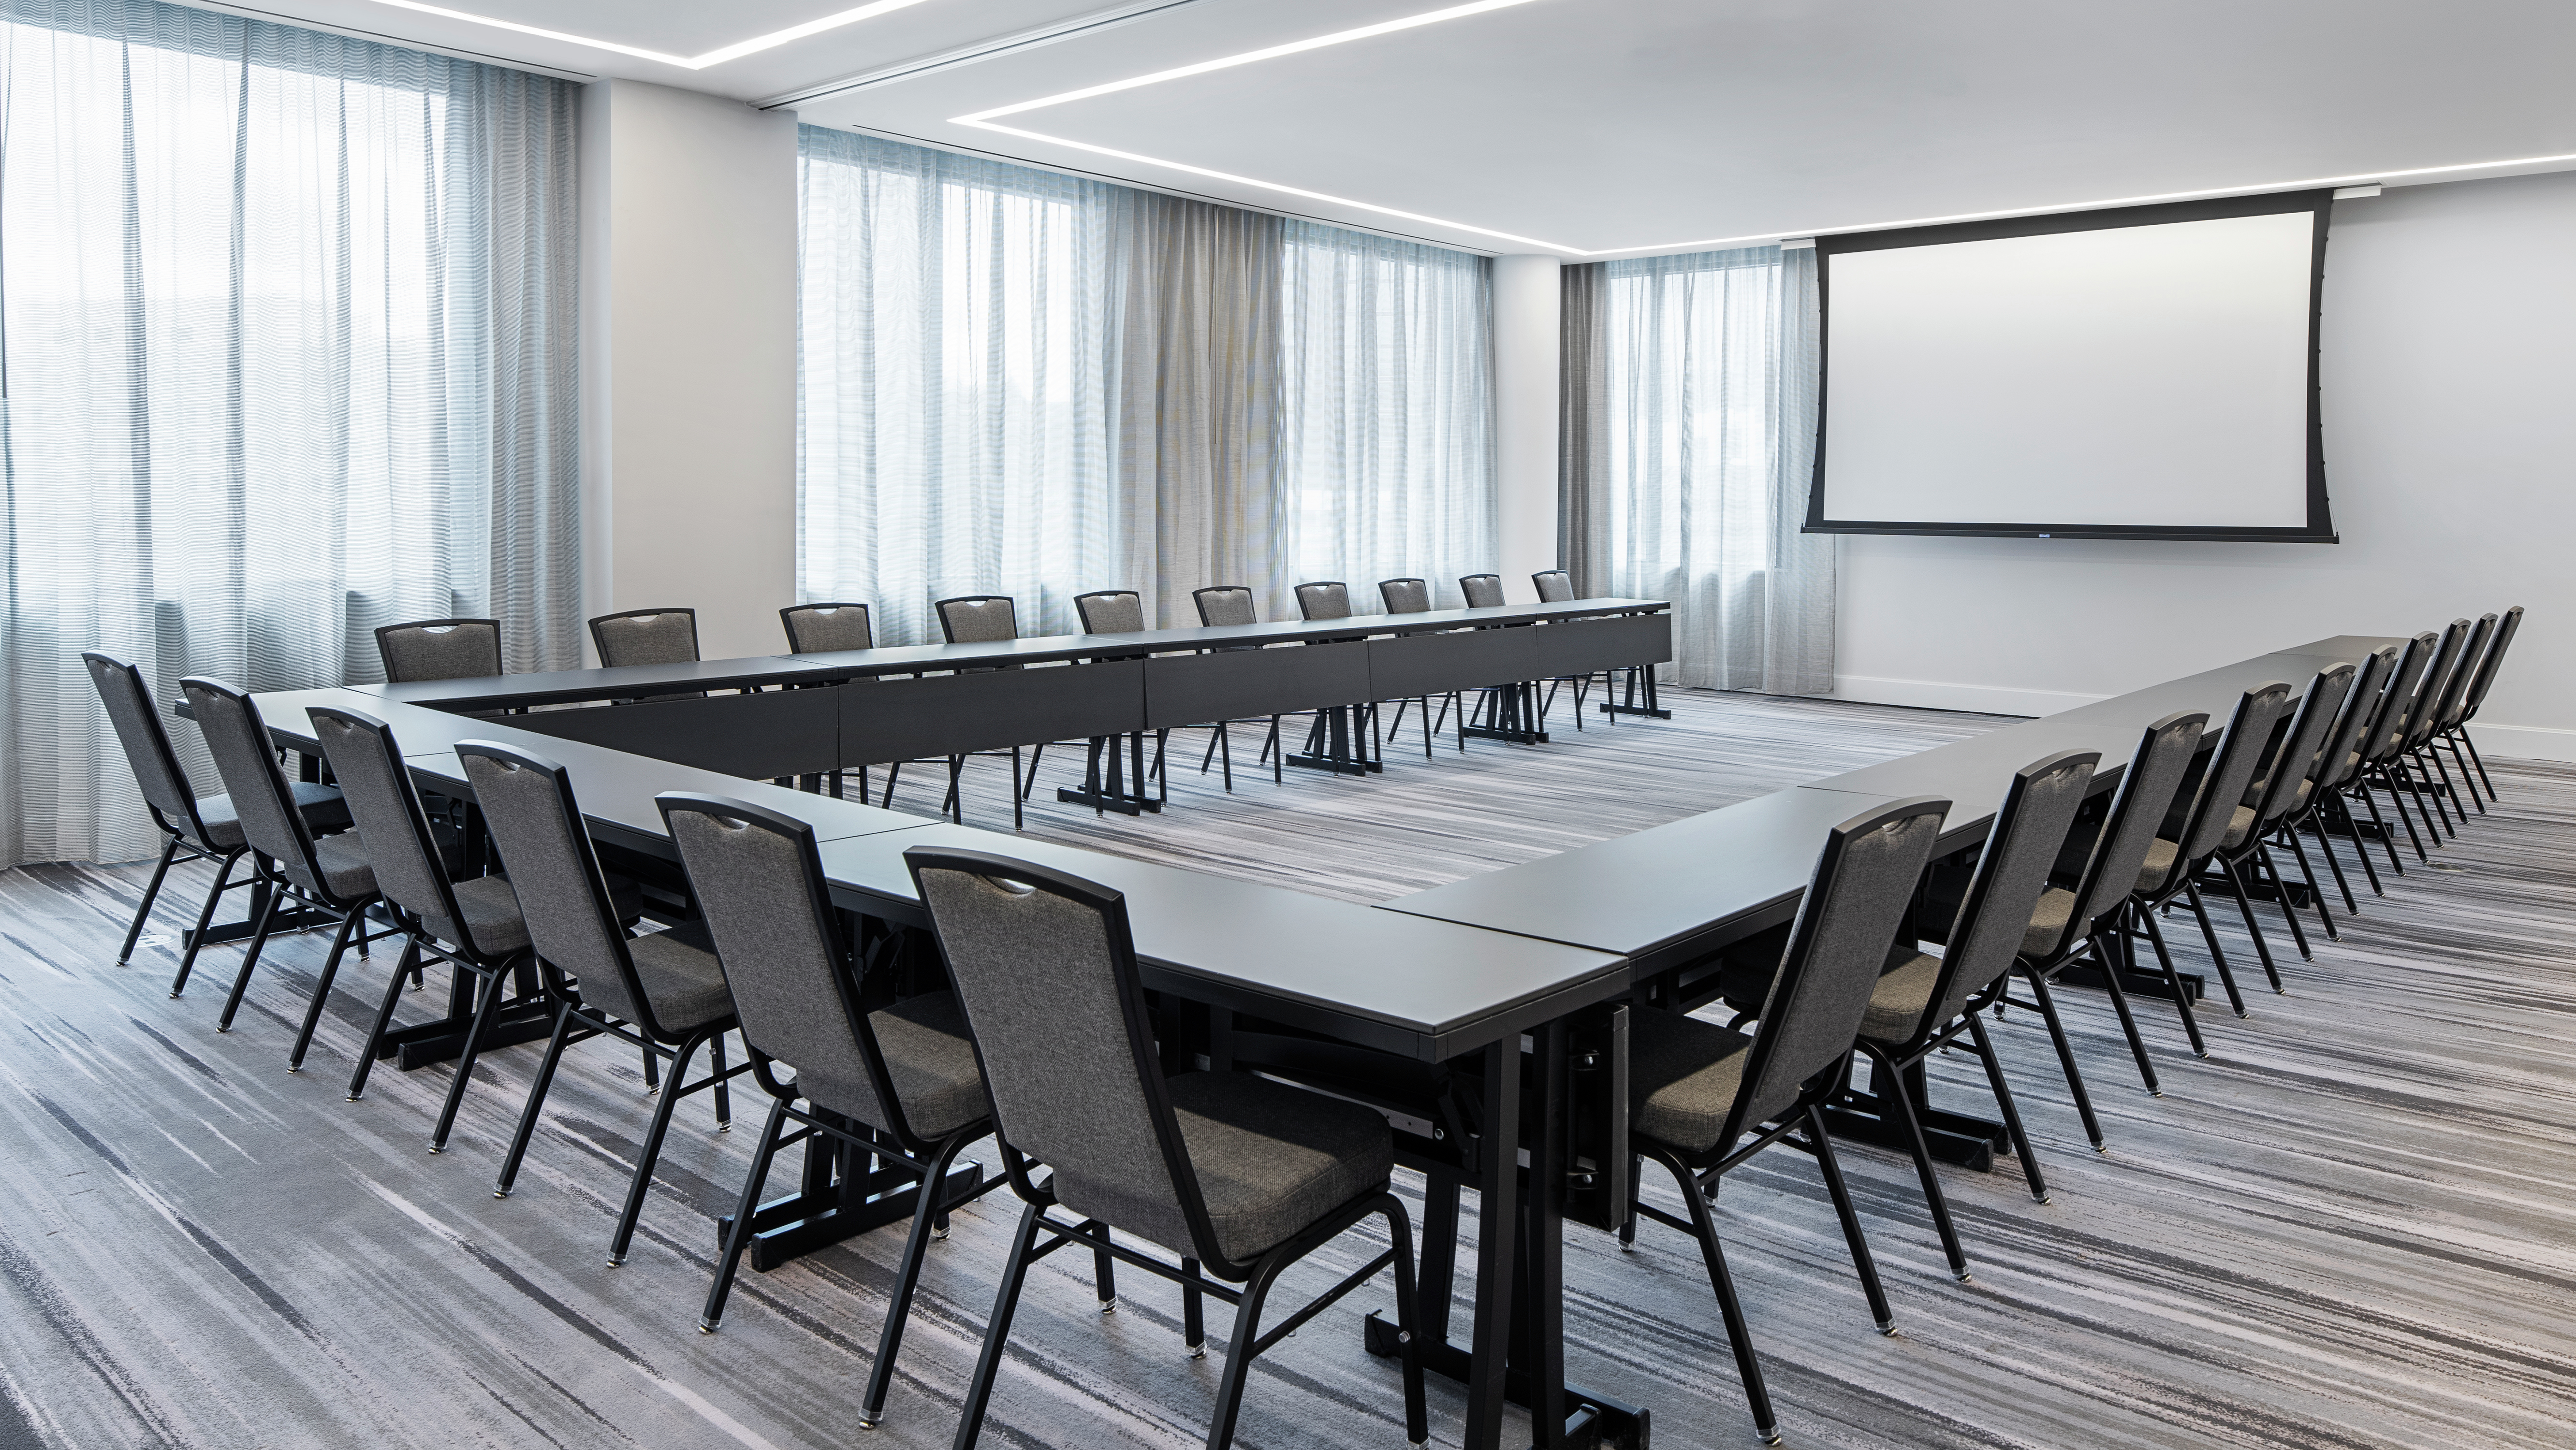 Meeting Space with U-Shaped Table Setup with Chairs and Projector Screen